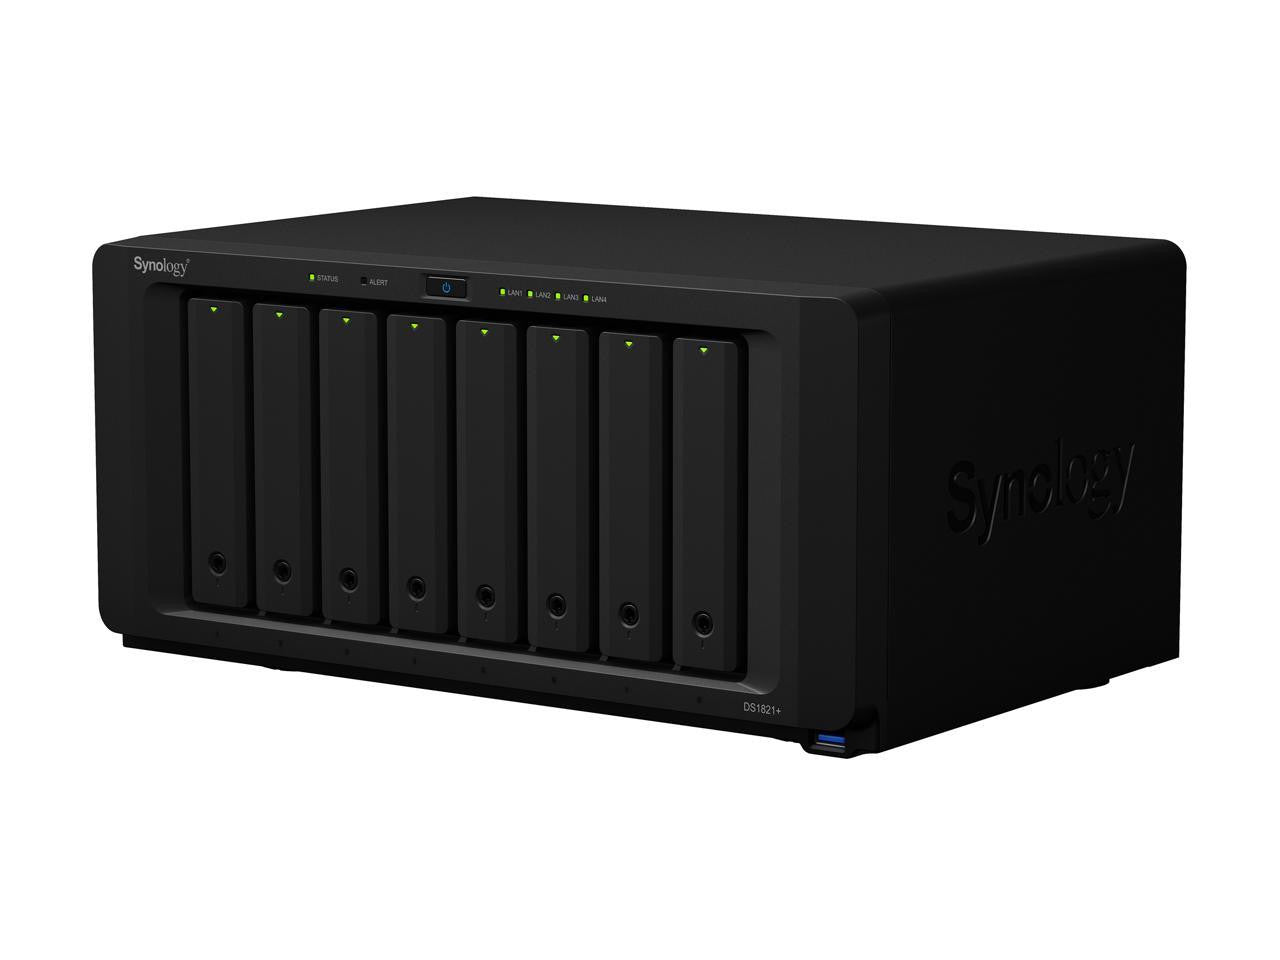 Synology DS1821+ 8-BAY DiskStation with 4GB Synology RAM and 32TB (8x4TB) Western Digital RED PLUS Drives Fully Assembled and Tested